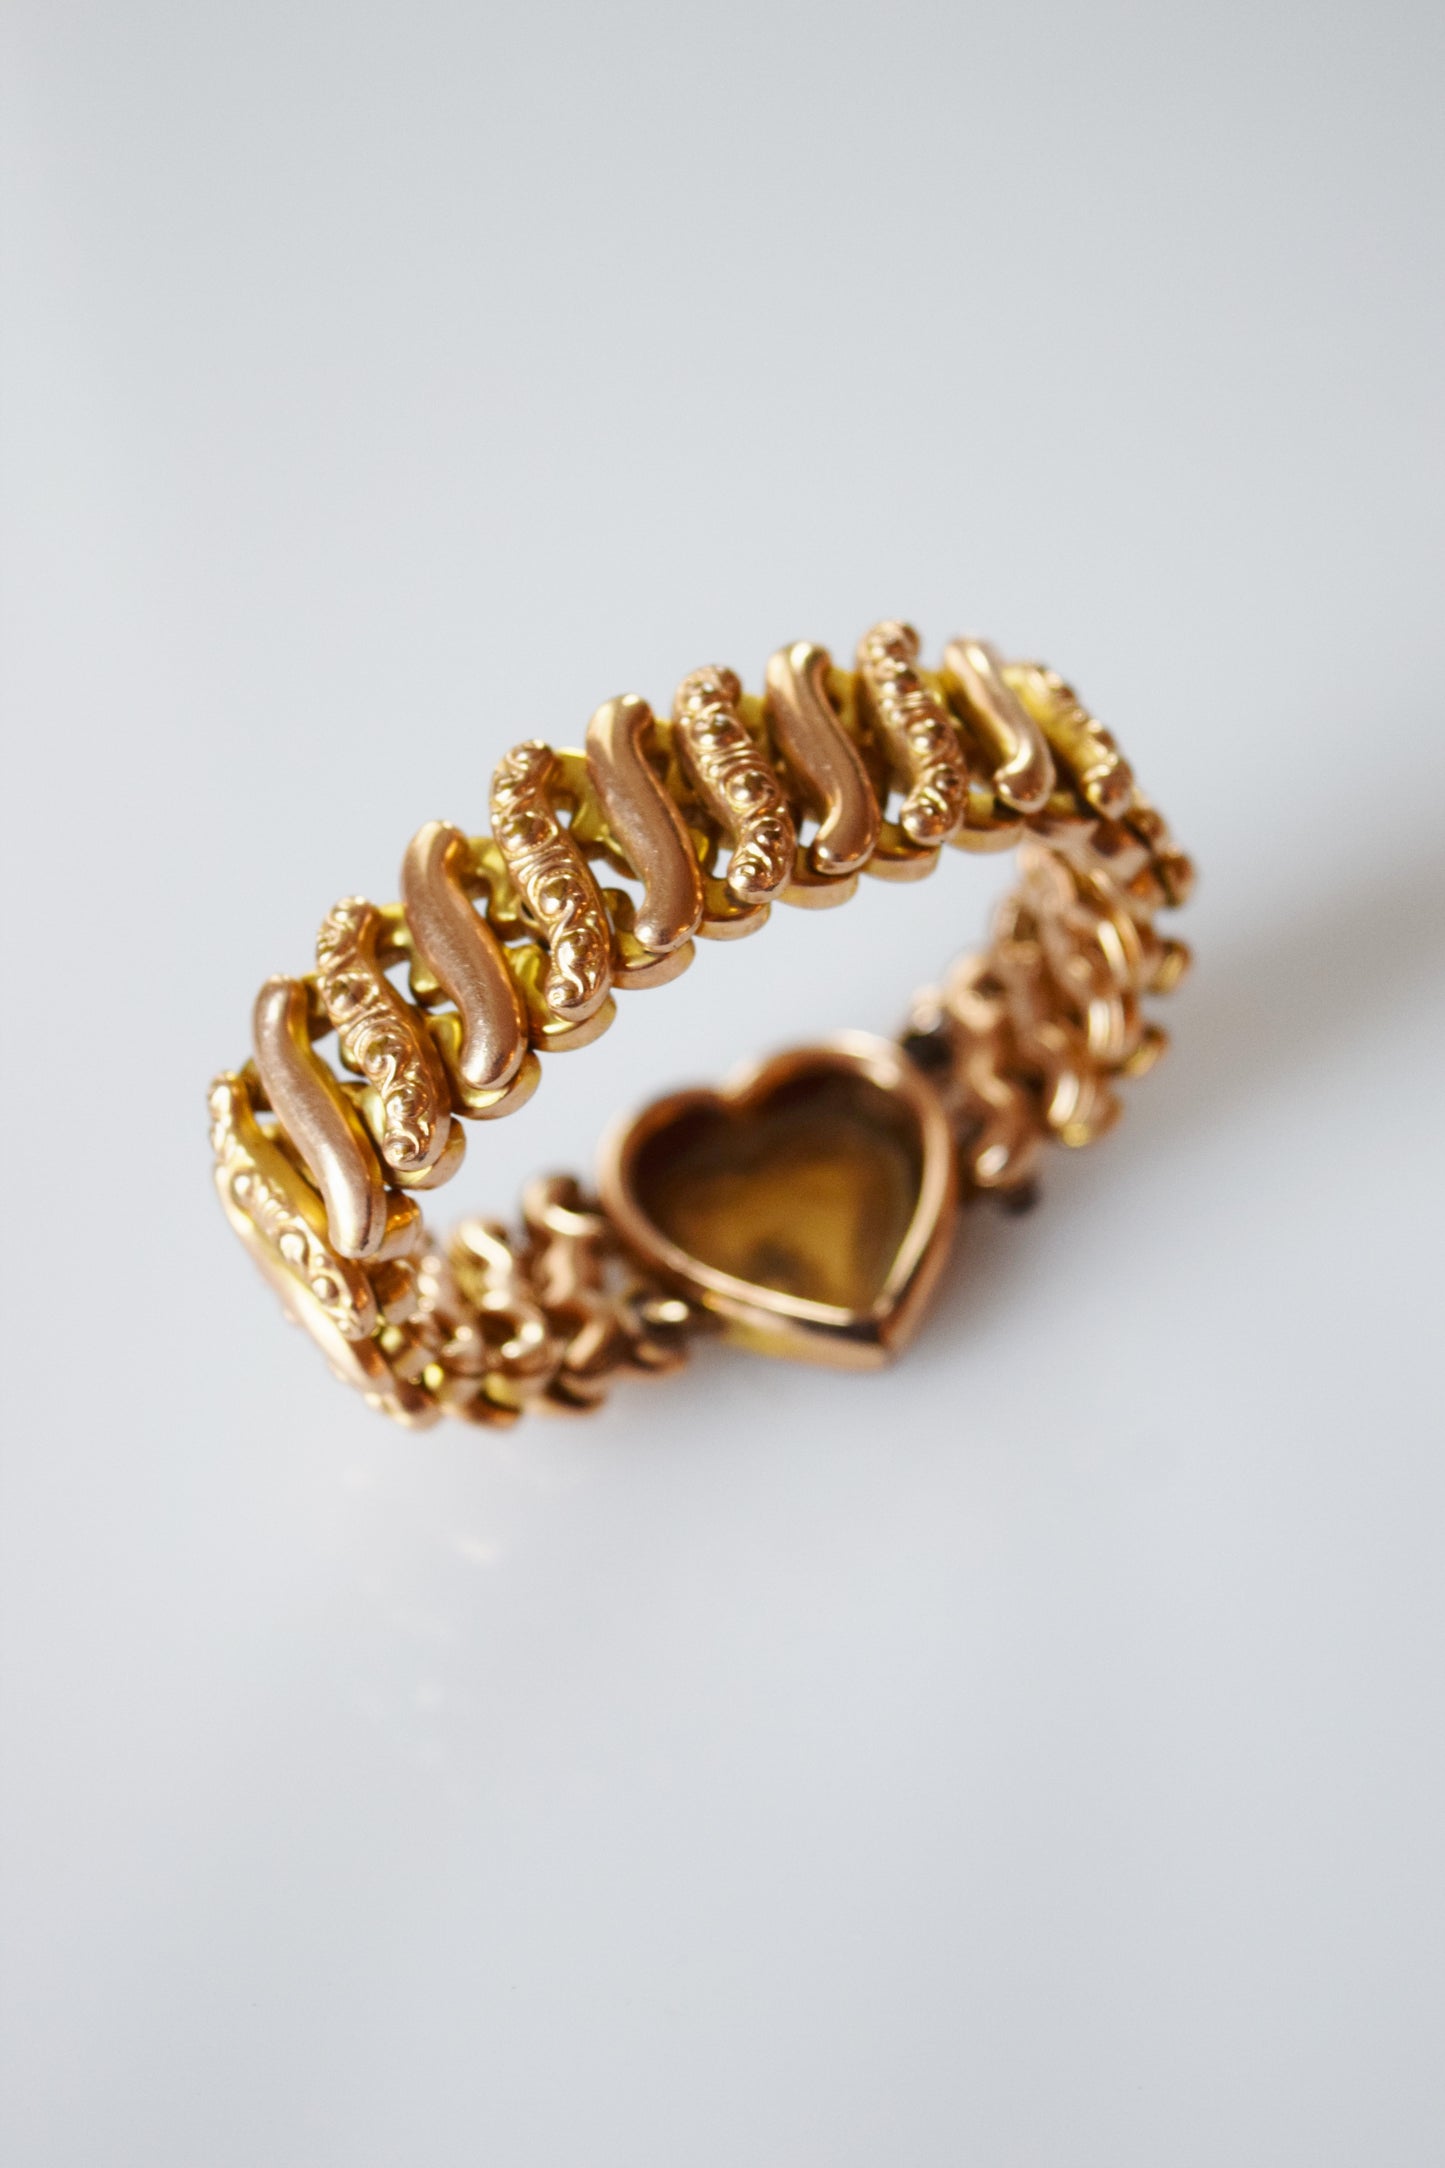 Vintage Sweetheart Expansion Bracelet with Engraved Heart Charm | "FMA"